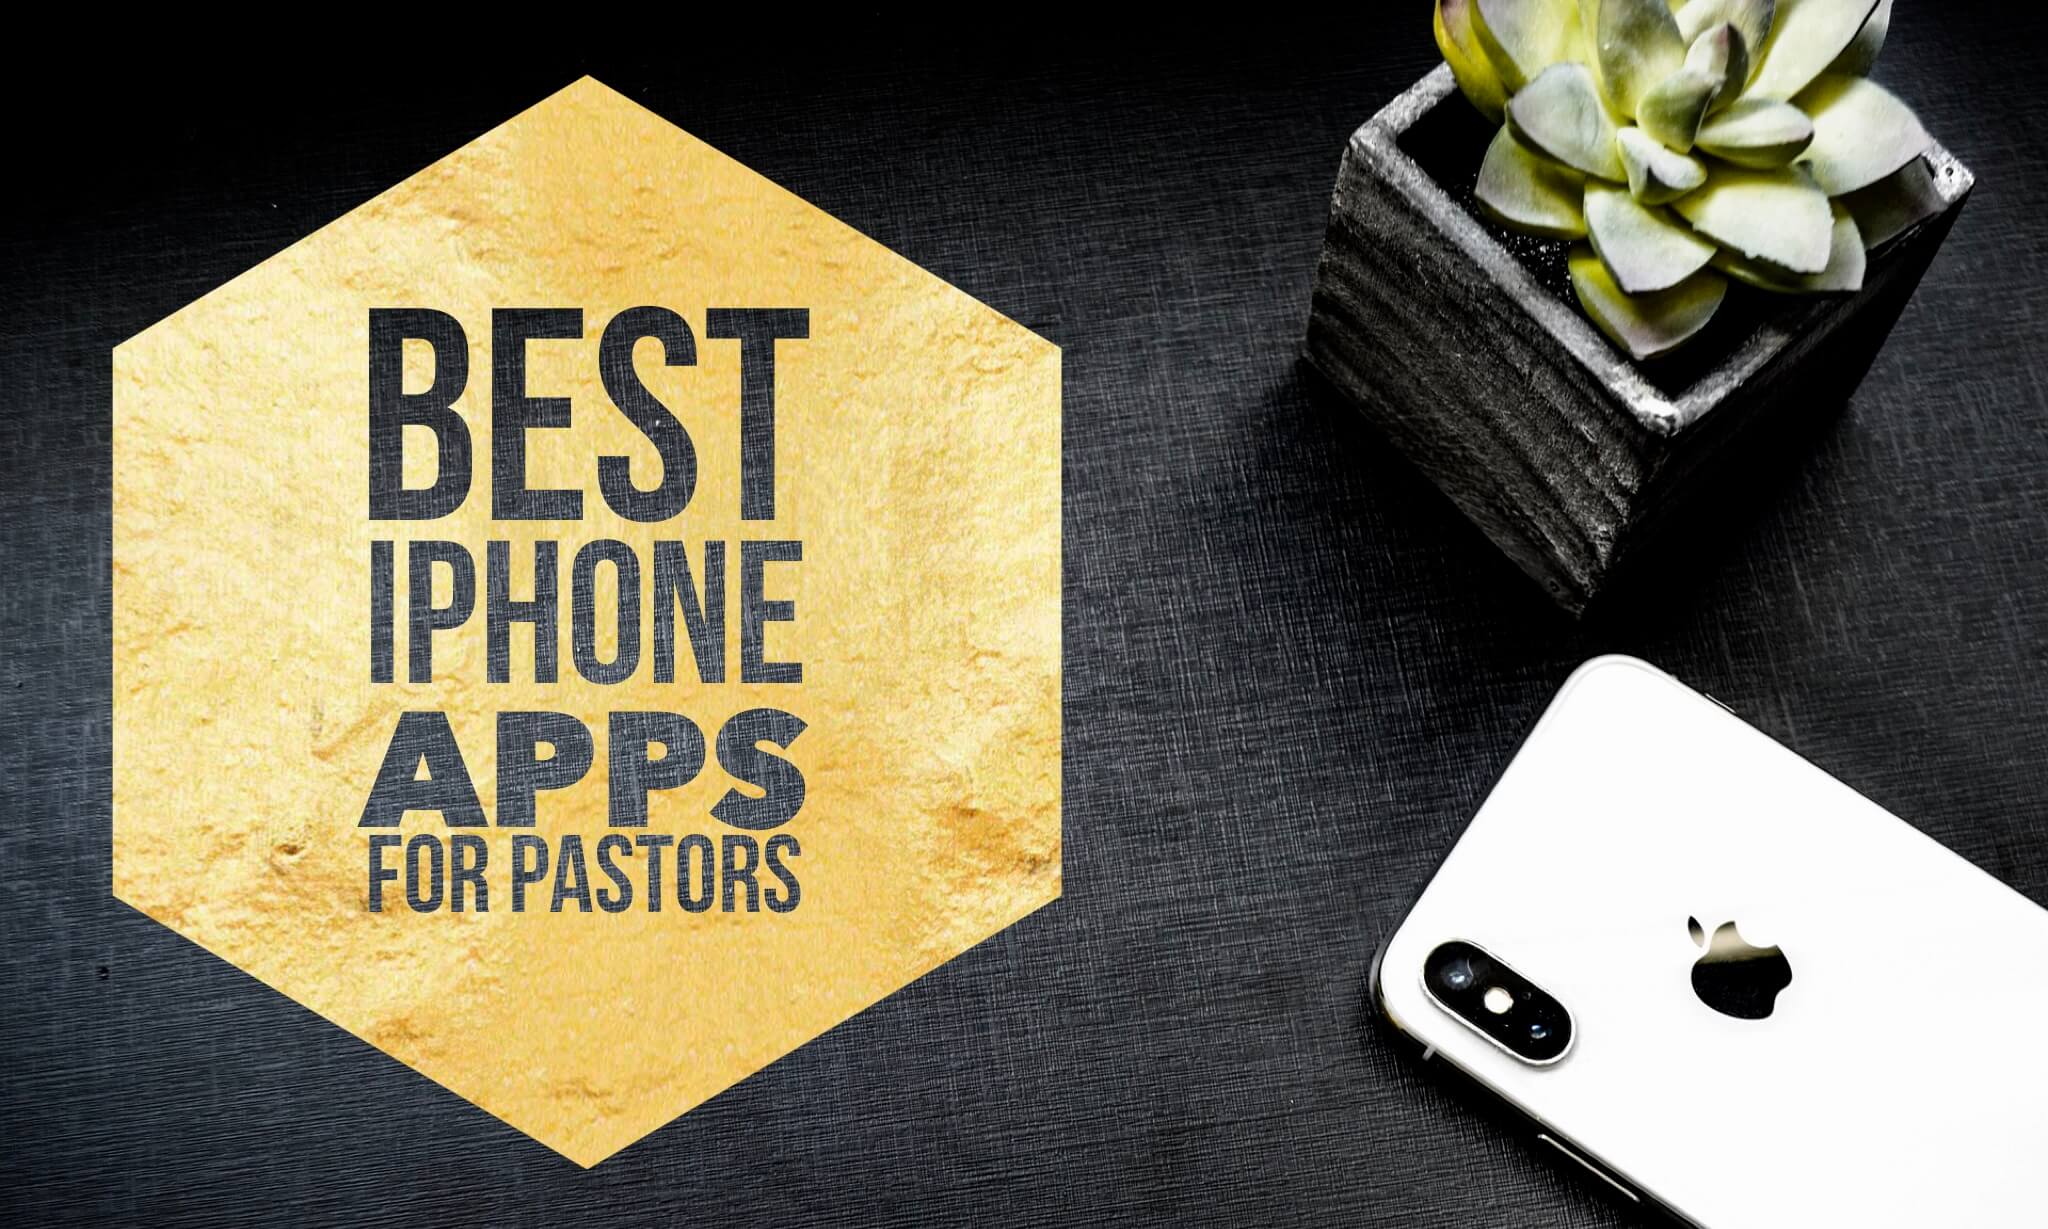 The Best iPhone Apps for Pastors (2019)